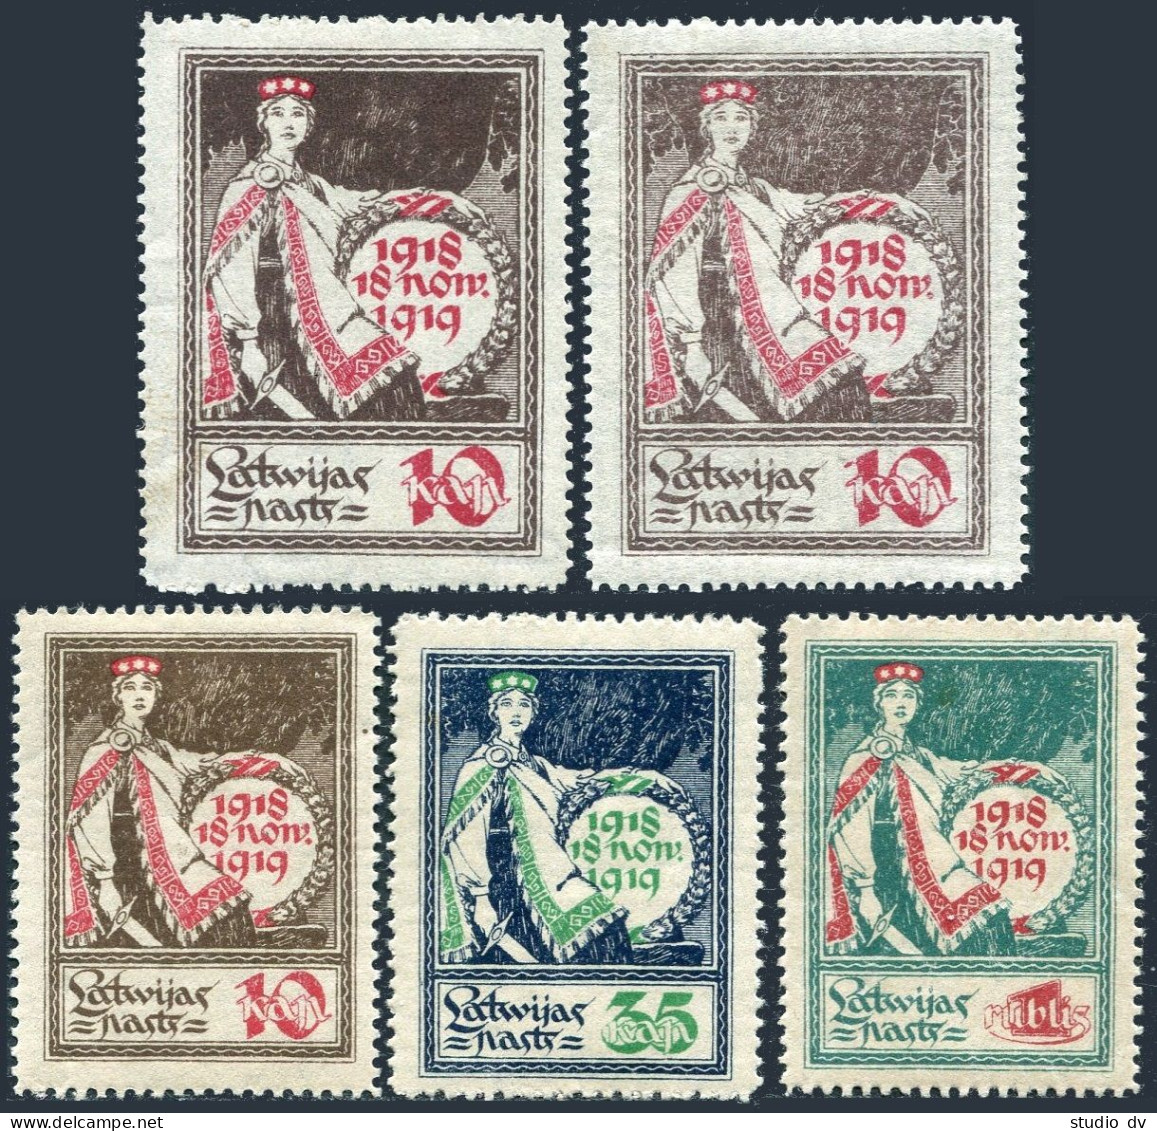 Latvia 59-63, MNH. Michel 32 X-y,33-35. Allegory-One Year Independence, 1919. - Lettonia